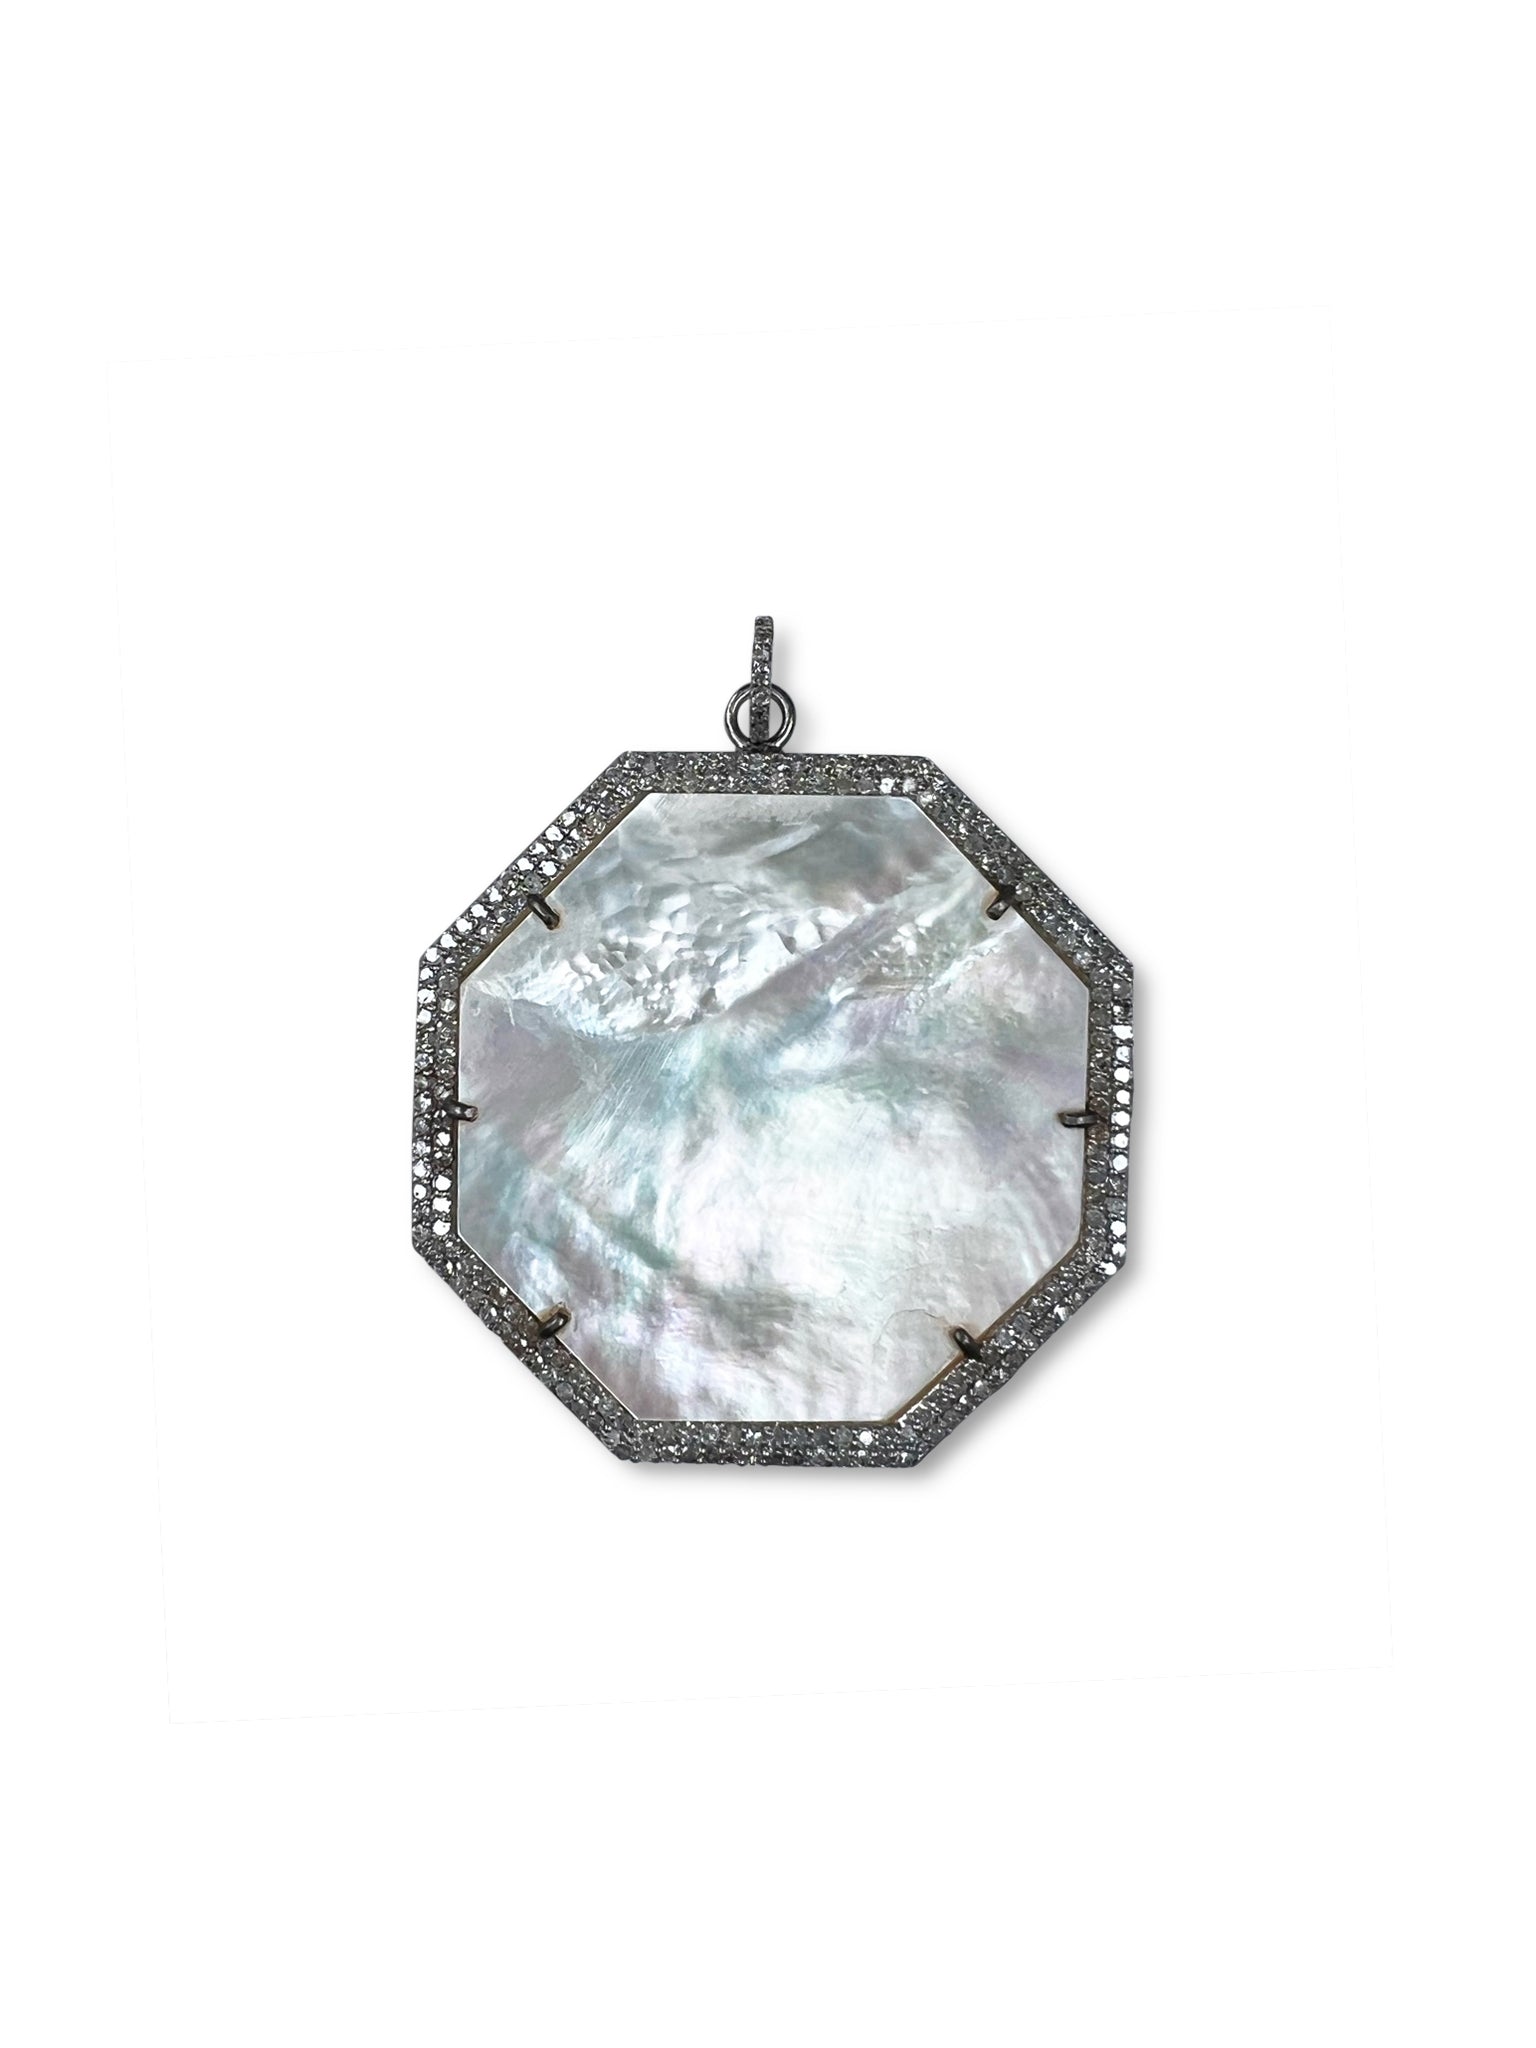 Mother of Pearl with Pave Diamonds set in Sterling Silver